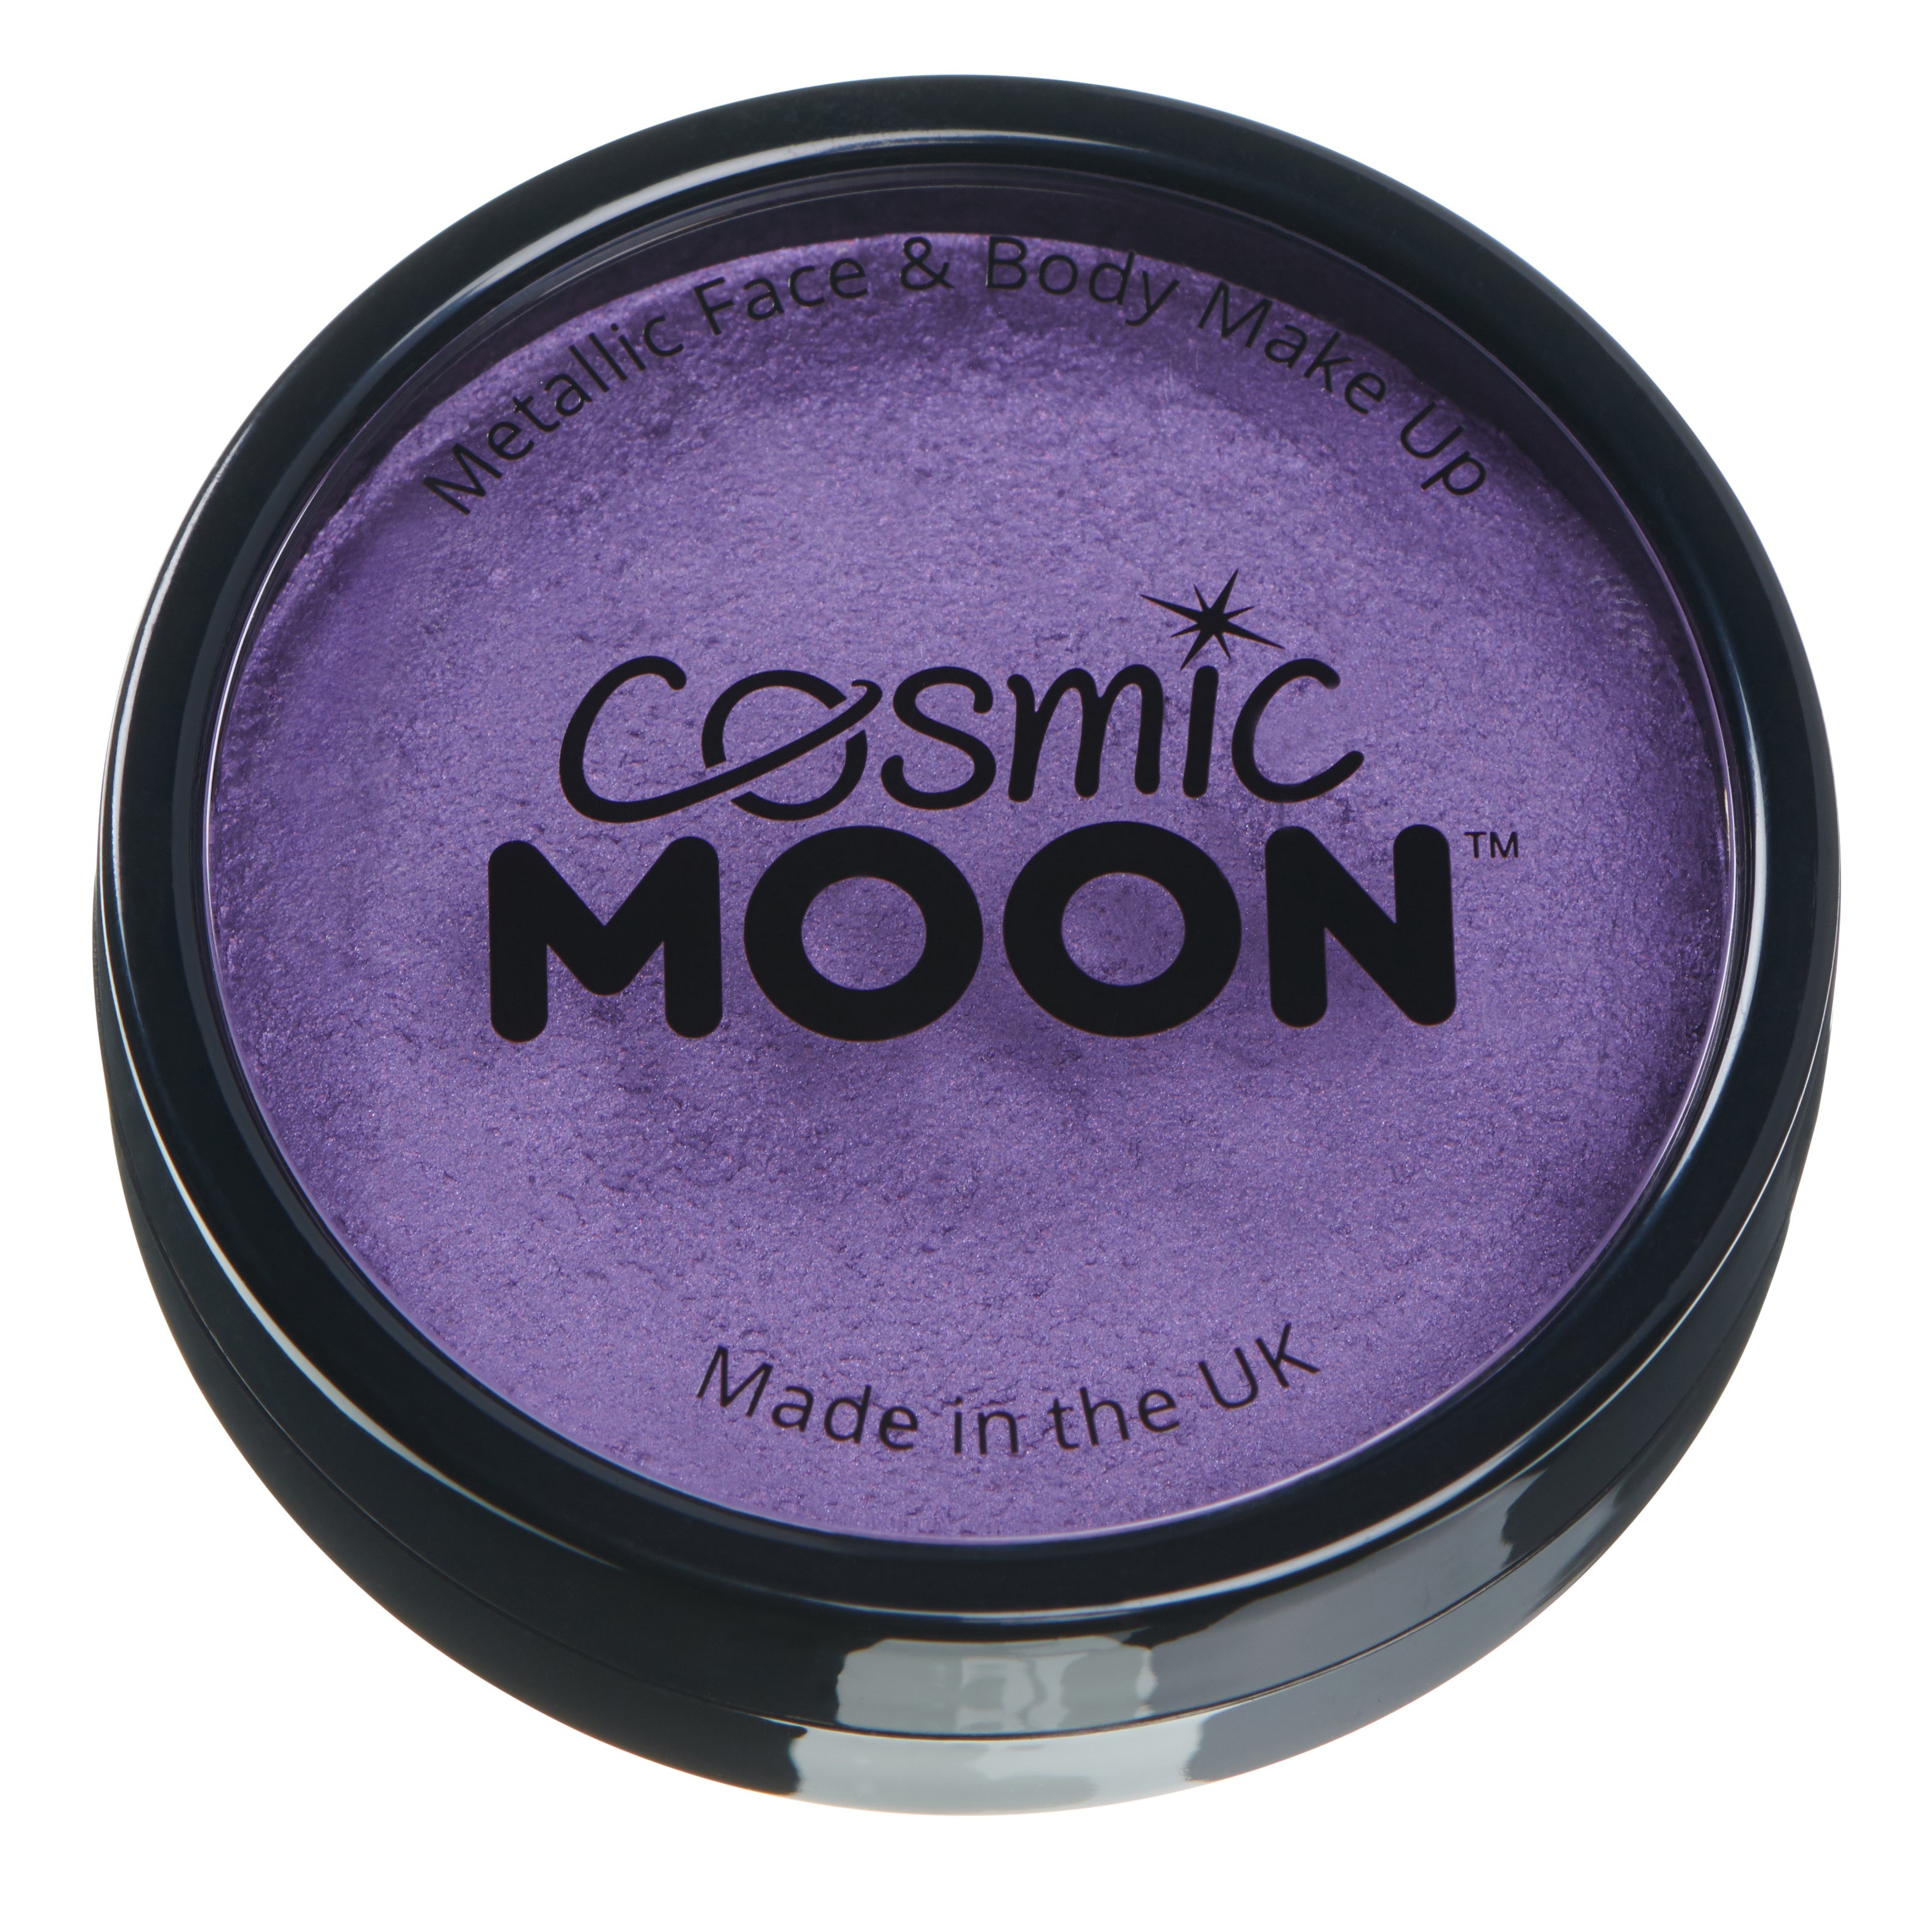 Purple - Metallic Professional Face Paint, 36g. Cosmetically certified, FDA & Health Canada compliant and cruelty free.